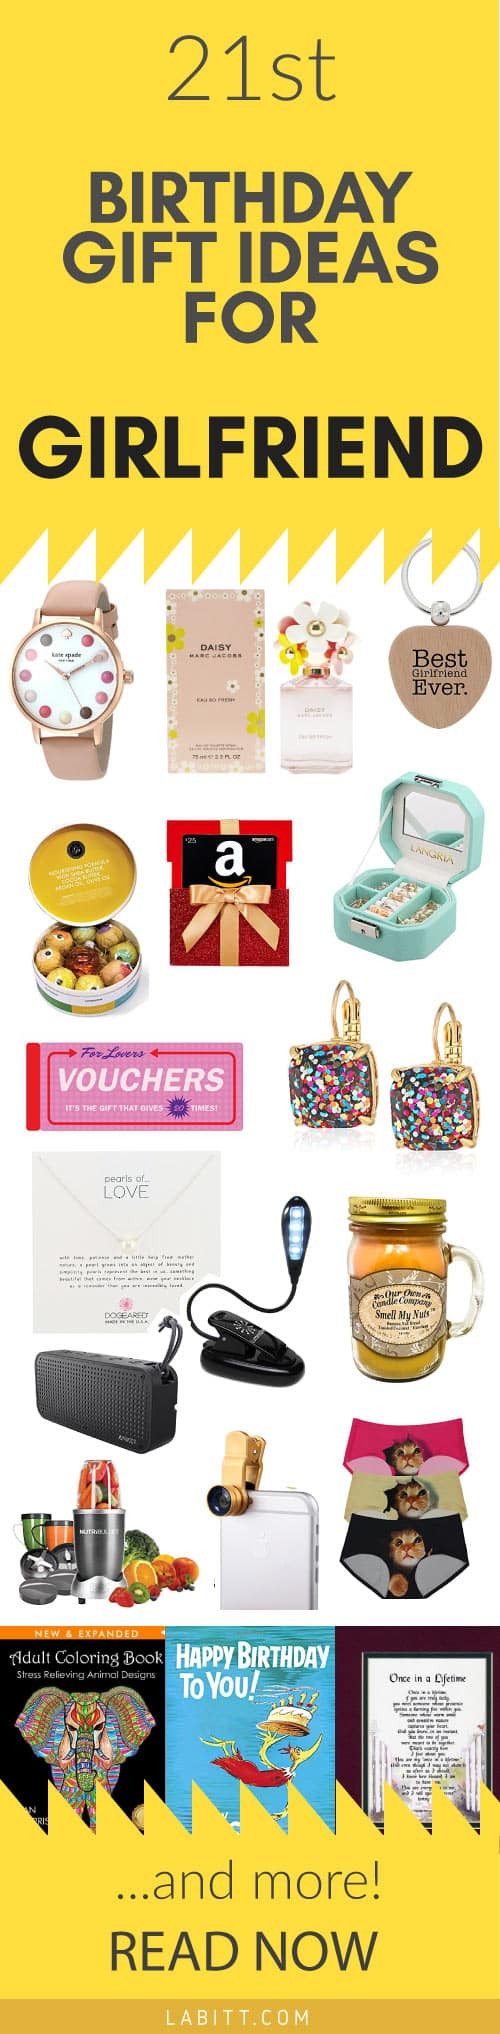 Awesome Gift Ideas For Girlfriend
 Creative 21st Birthday Gift Ideas for Girlfriend 21